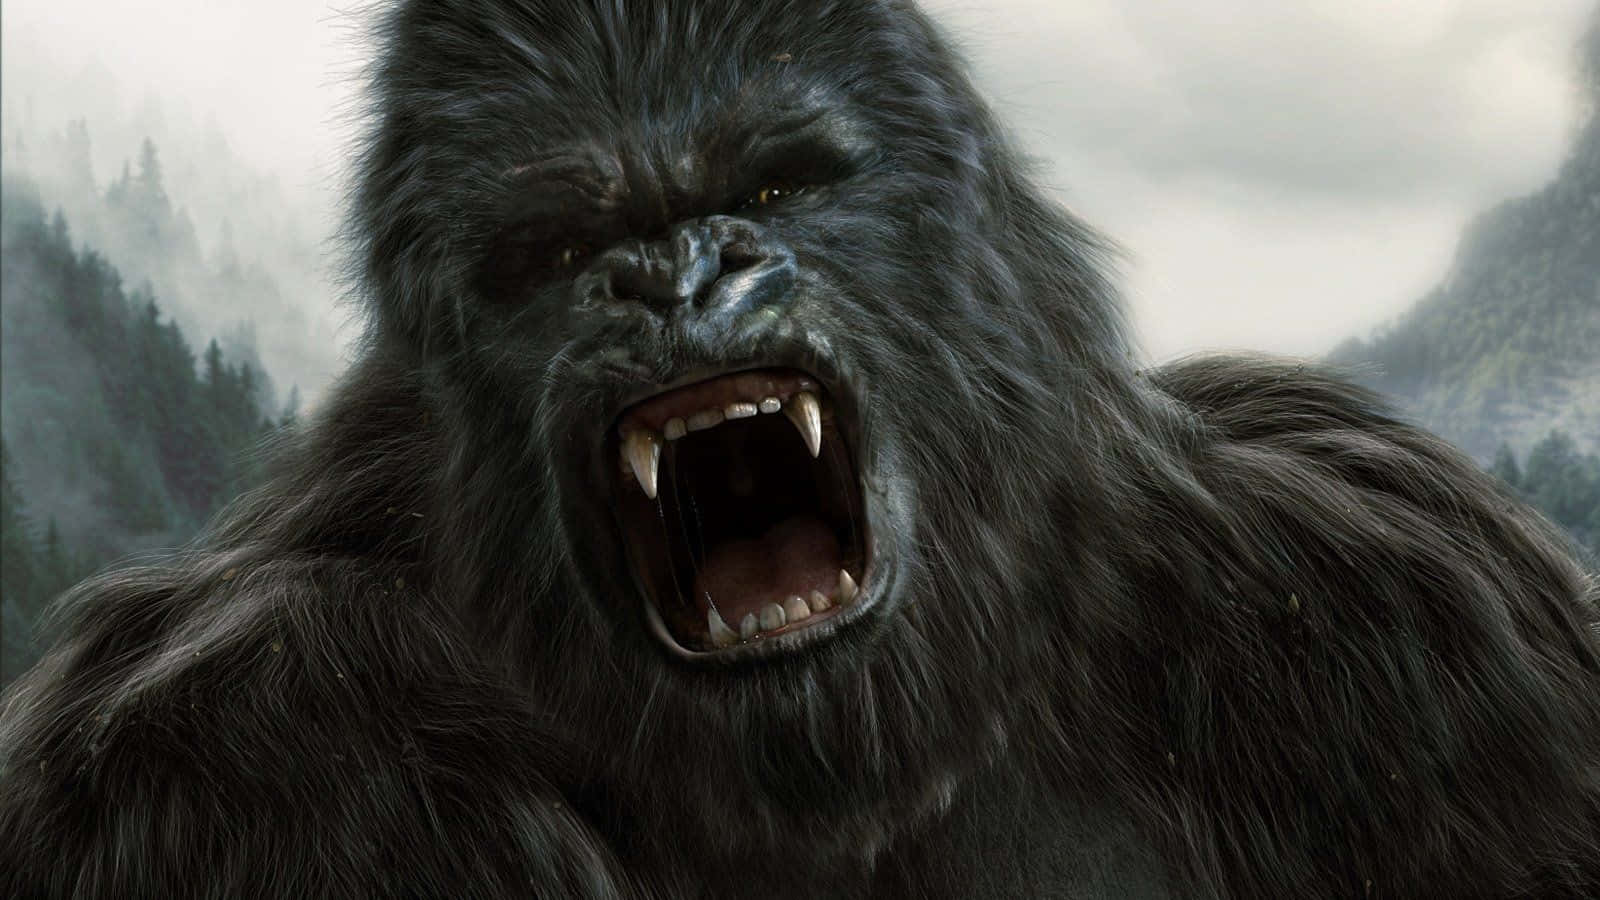 A Gorilla With Its Mouth Open In The Forest